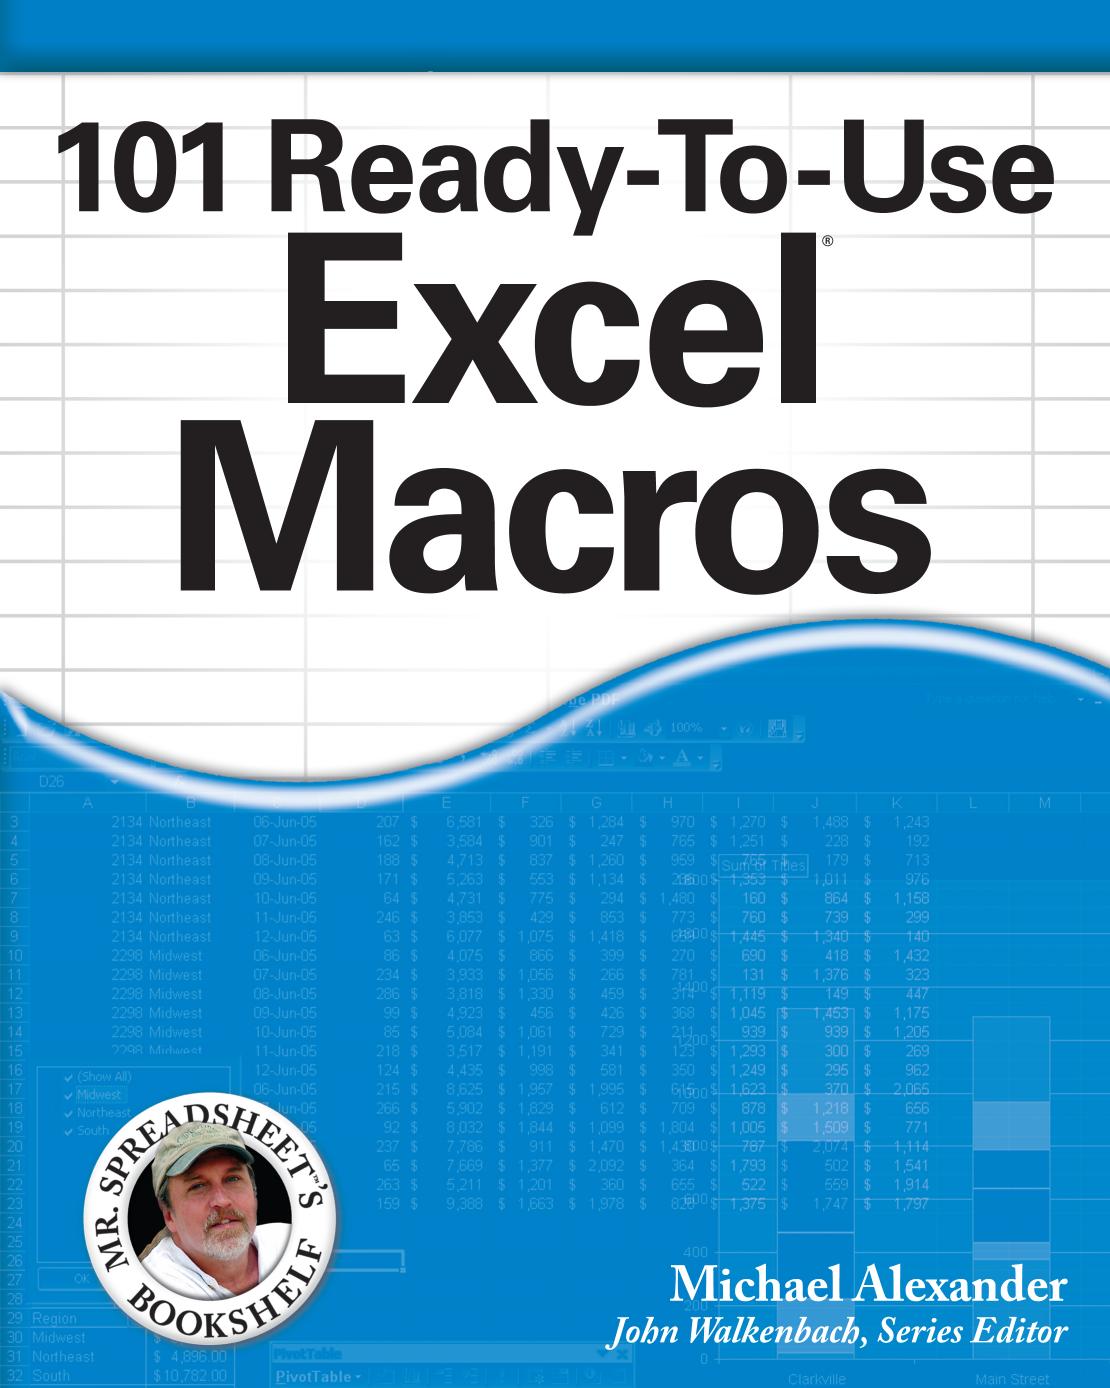 101 Ready-To-Use Excel Macros by Michael Alexander